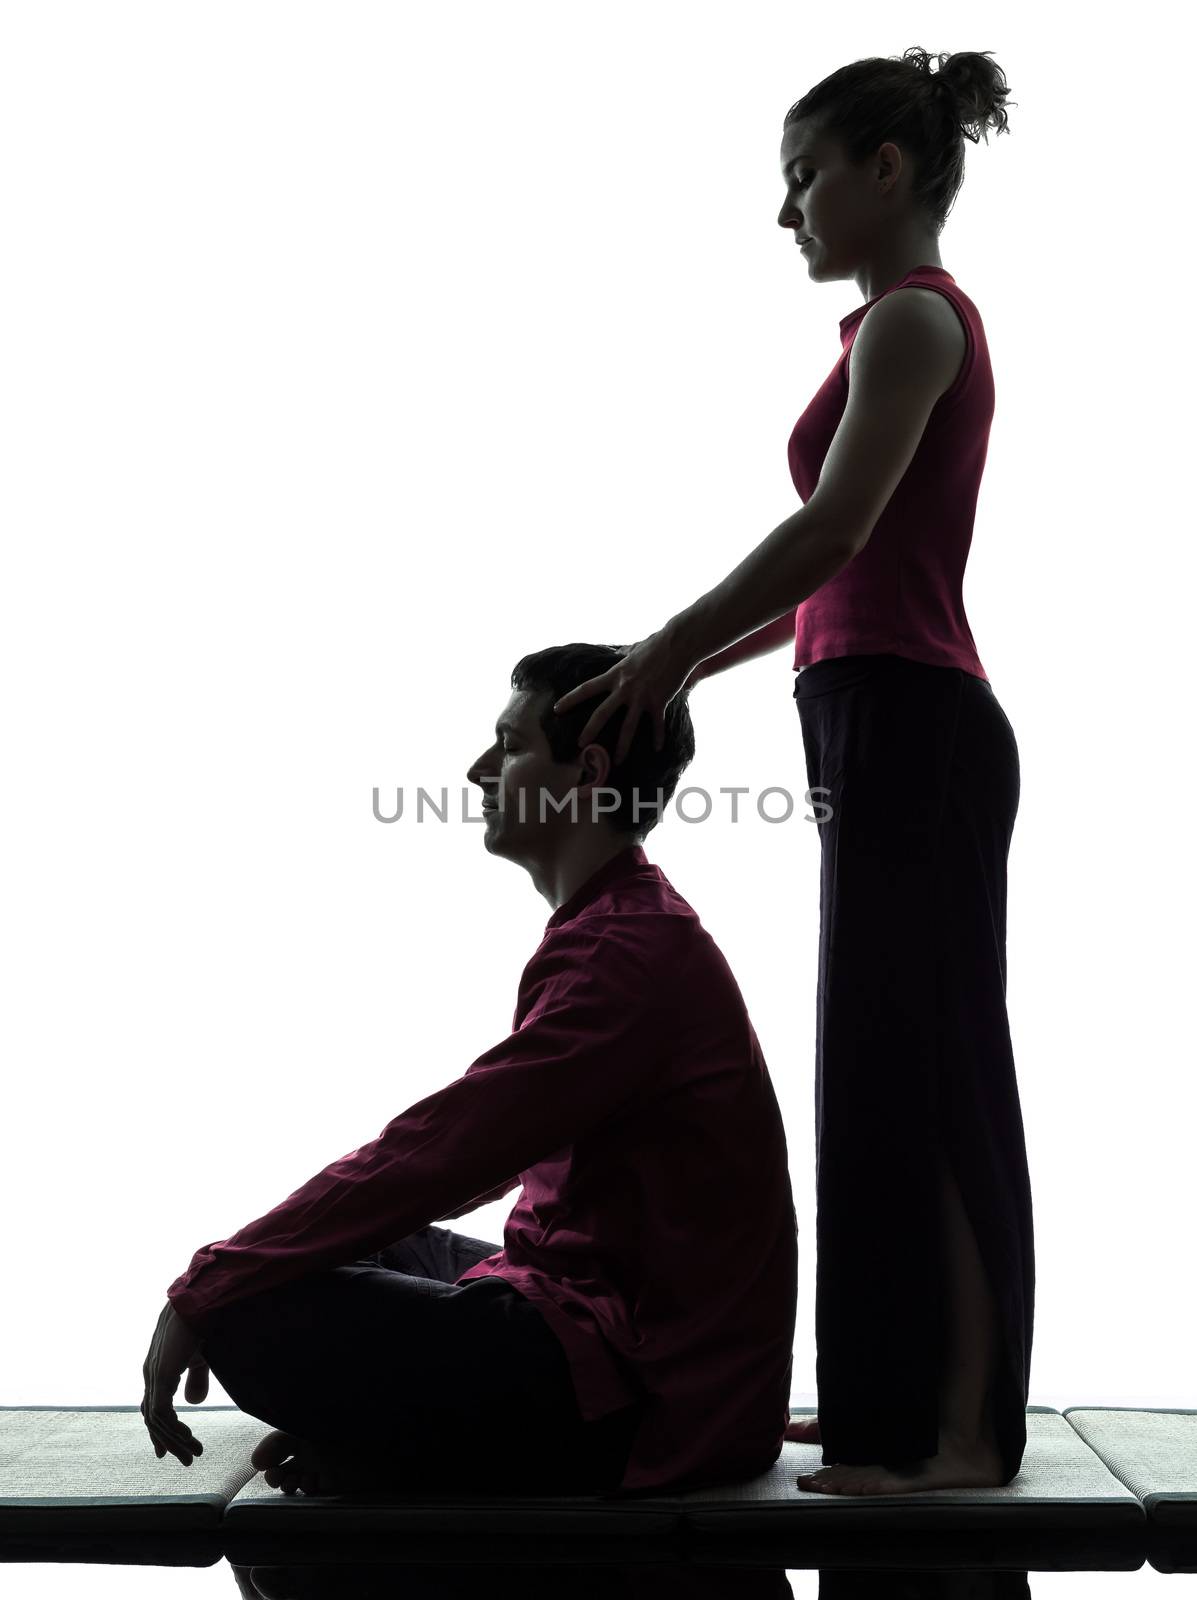 one man and woman performing thai massage in silhouette studio on white background